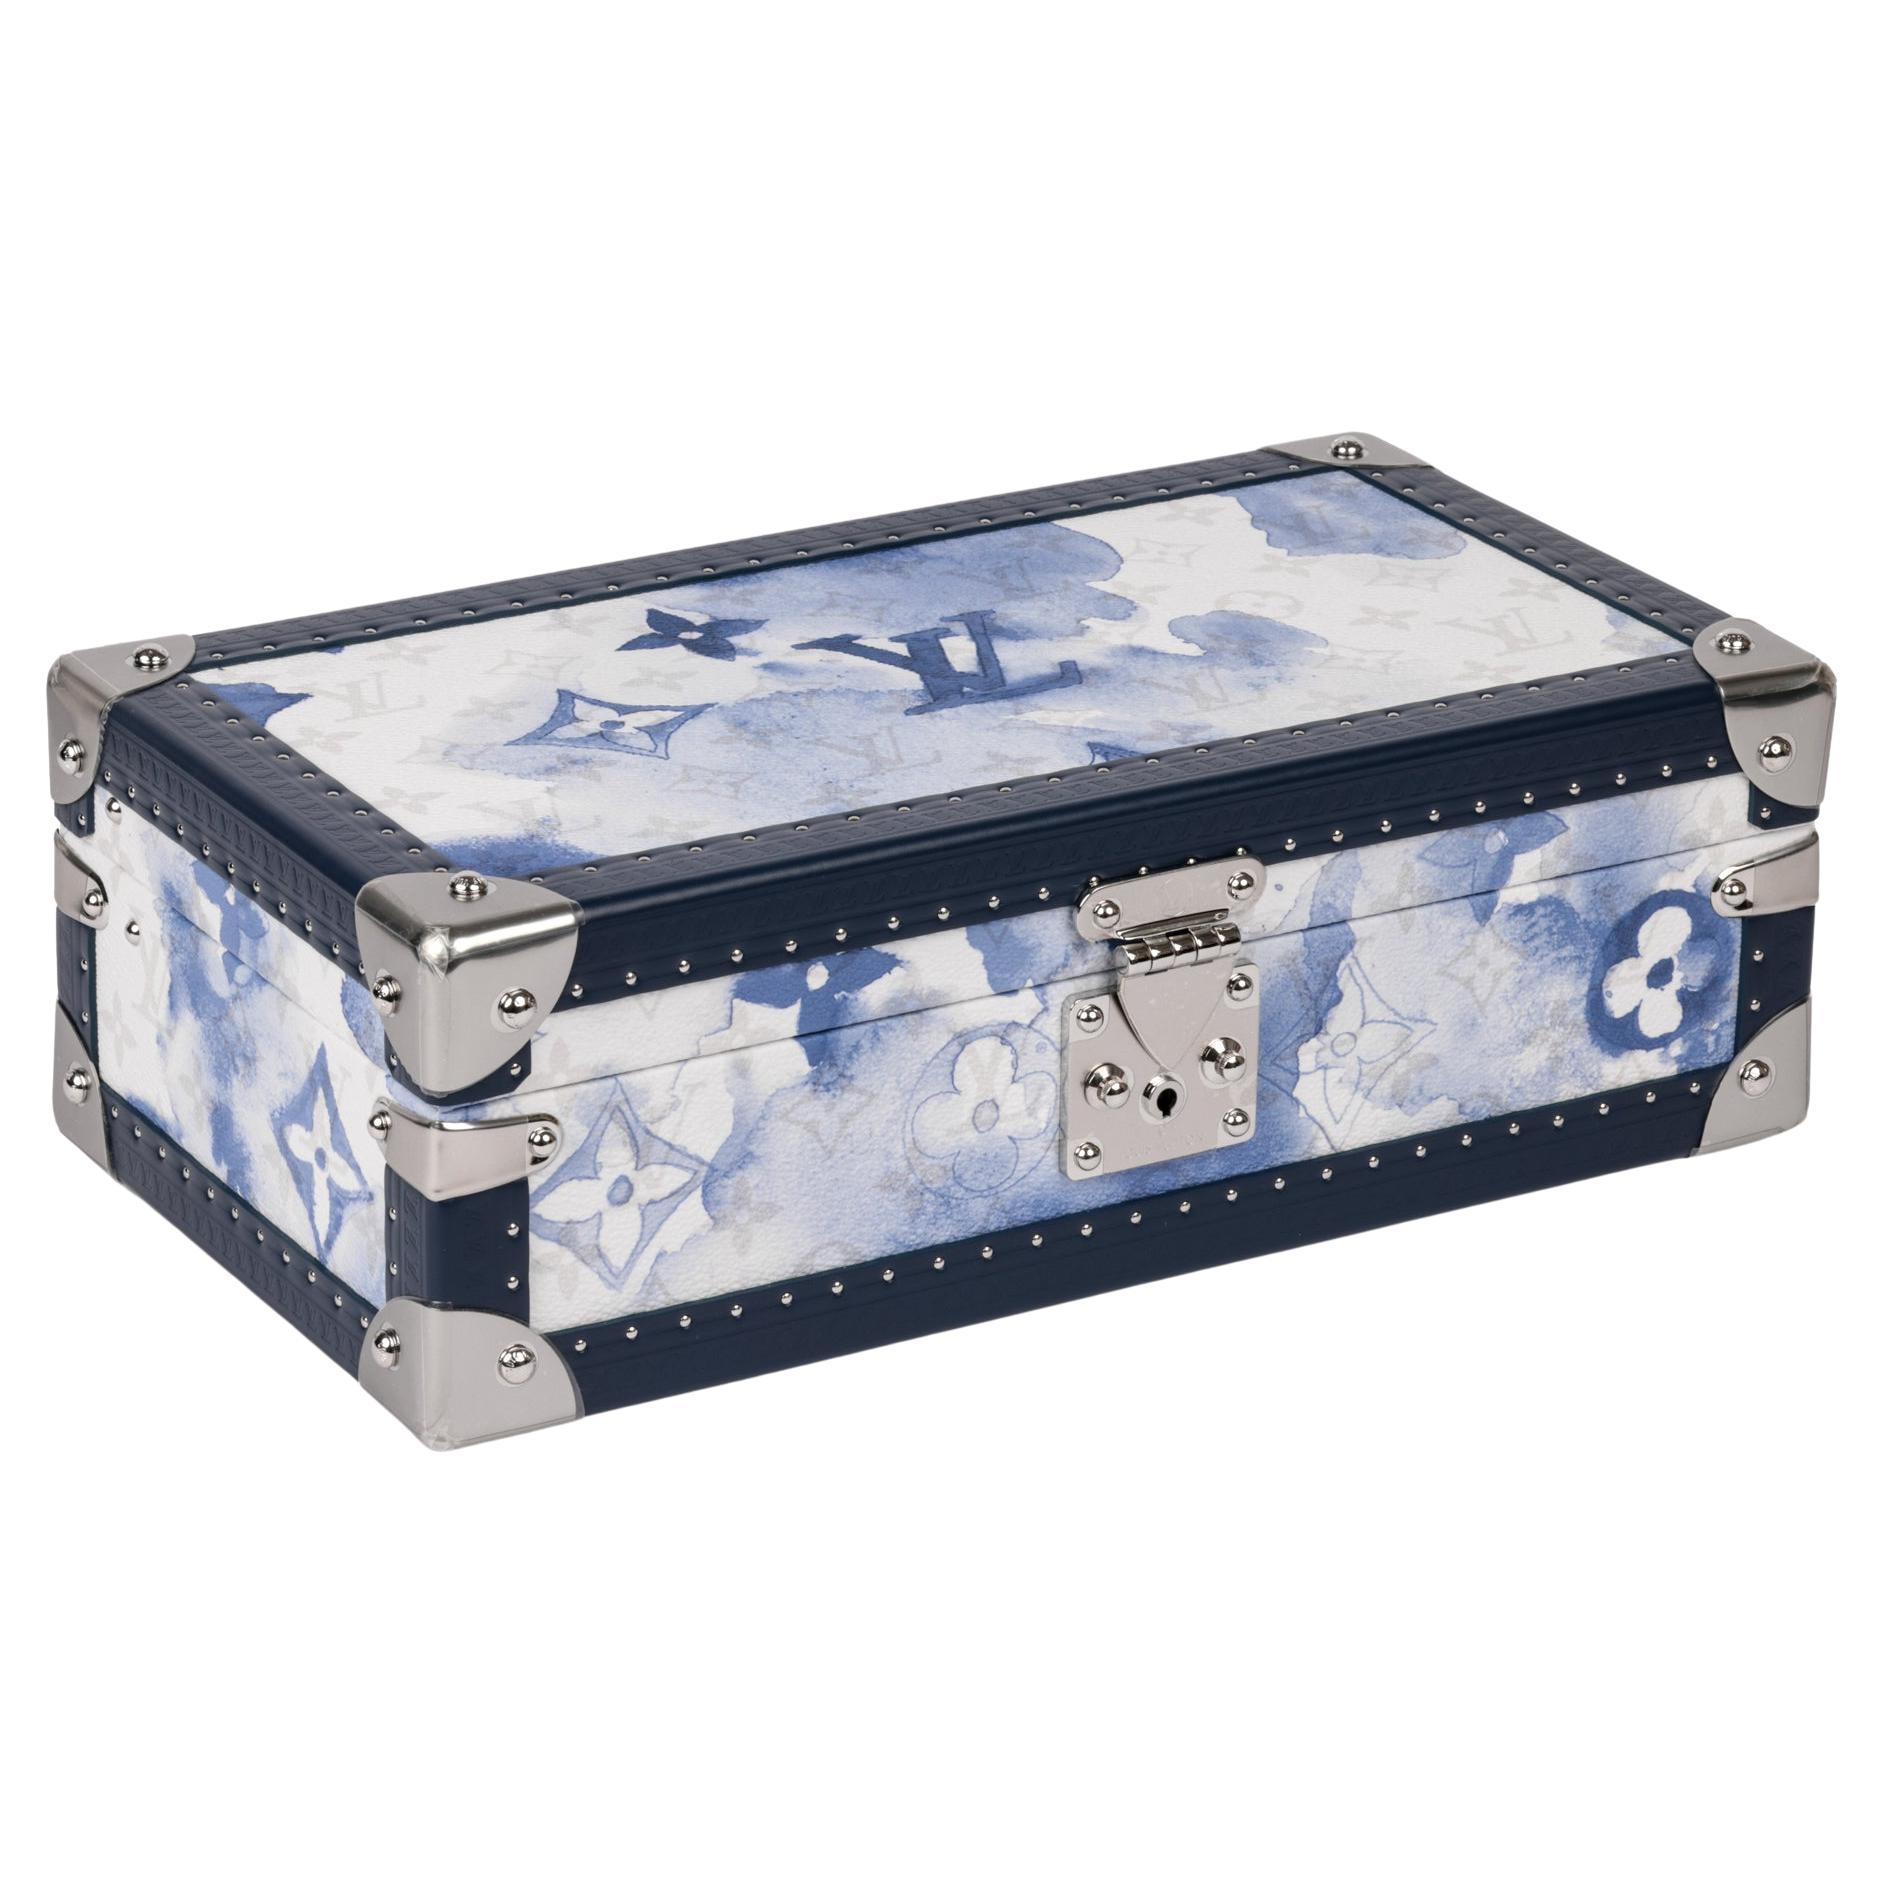 Louis Vuitton Watch Box - 3 For Sale on 1stDibs